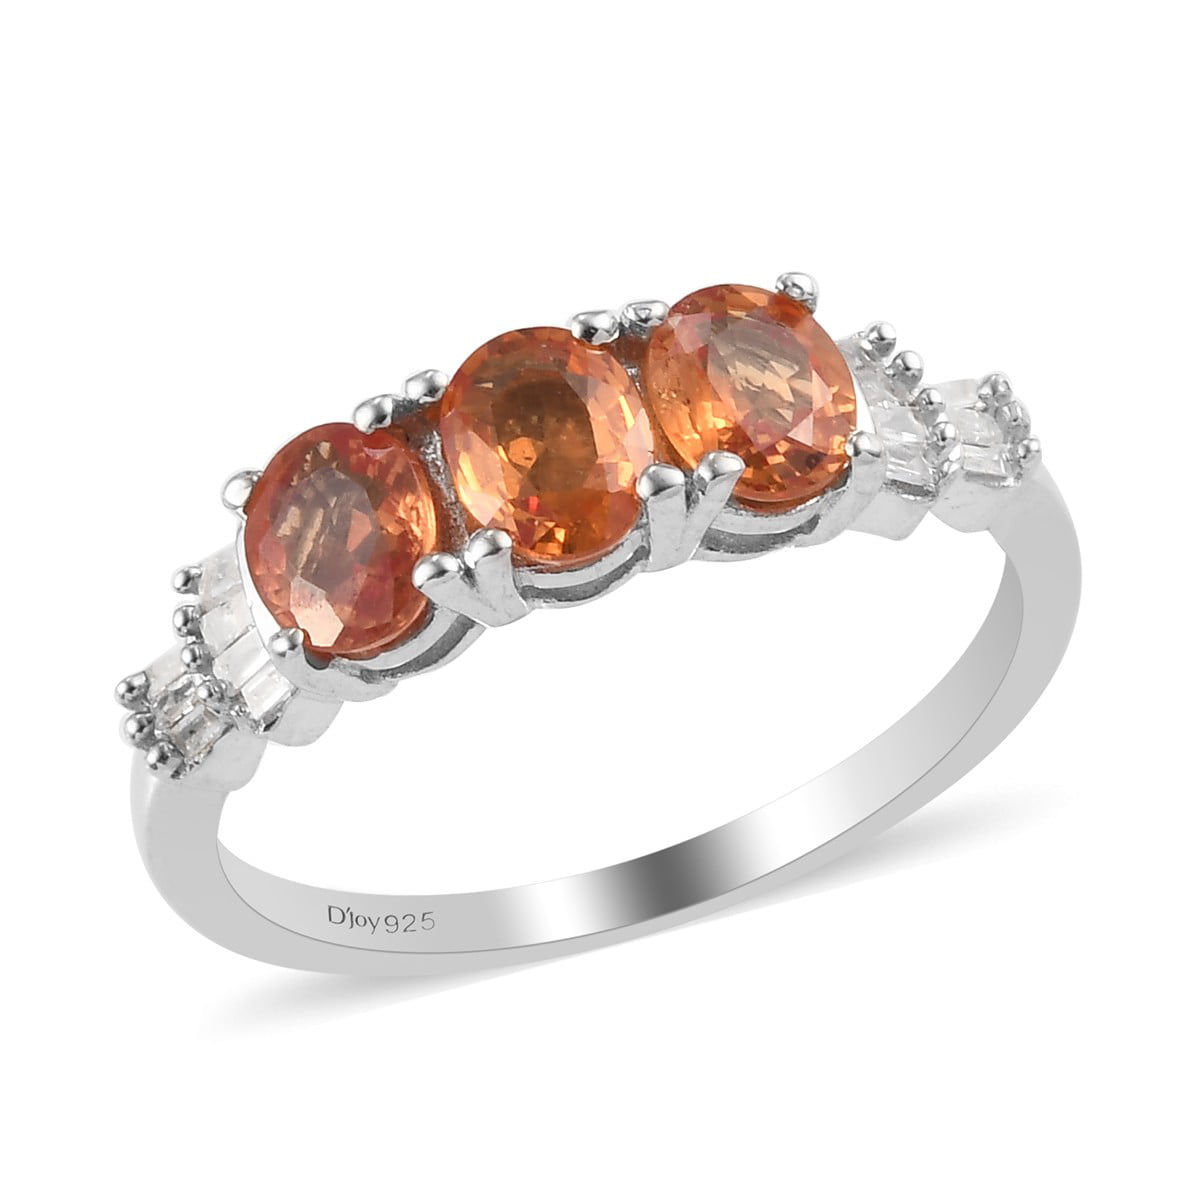 TVS-JEWELS Attractive Orange Sapphire Engagement Ring in Black Rhodium Plated 925 Sterling Silver 6 